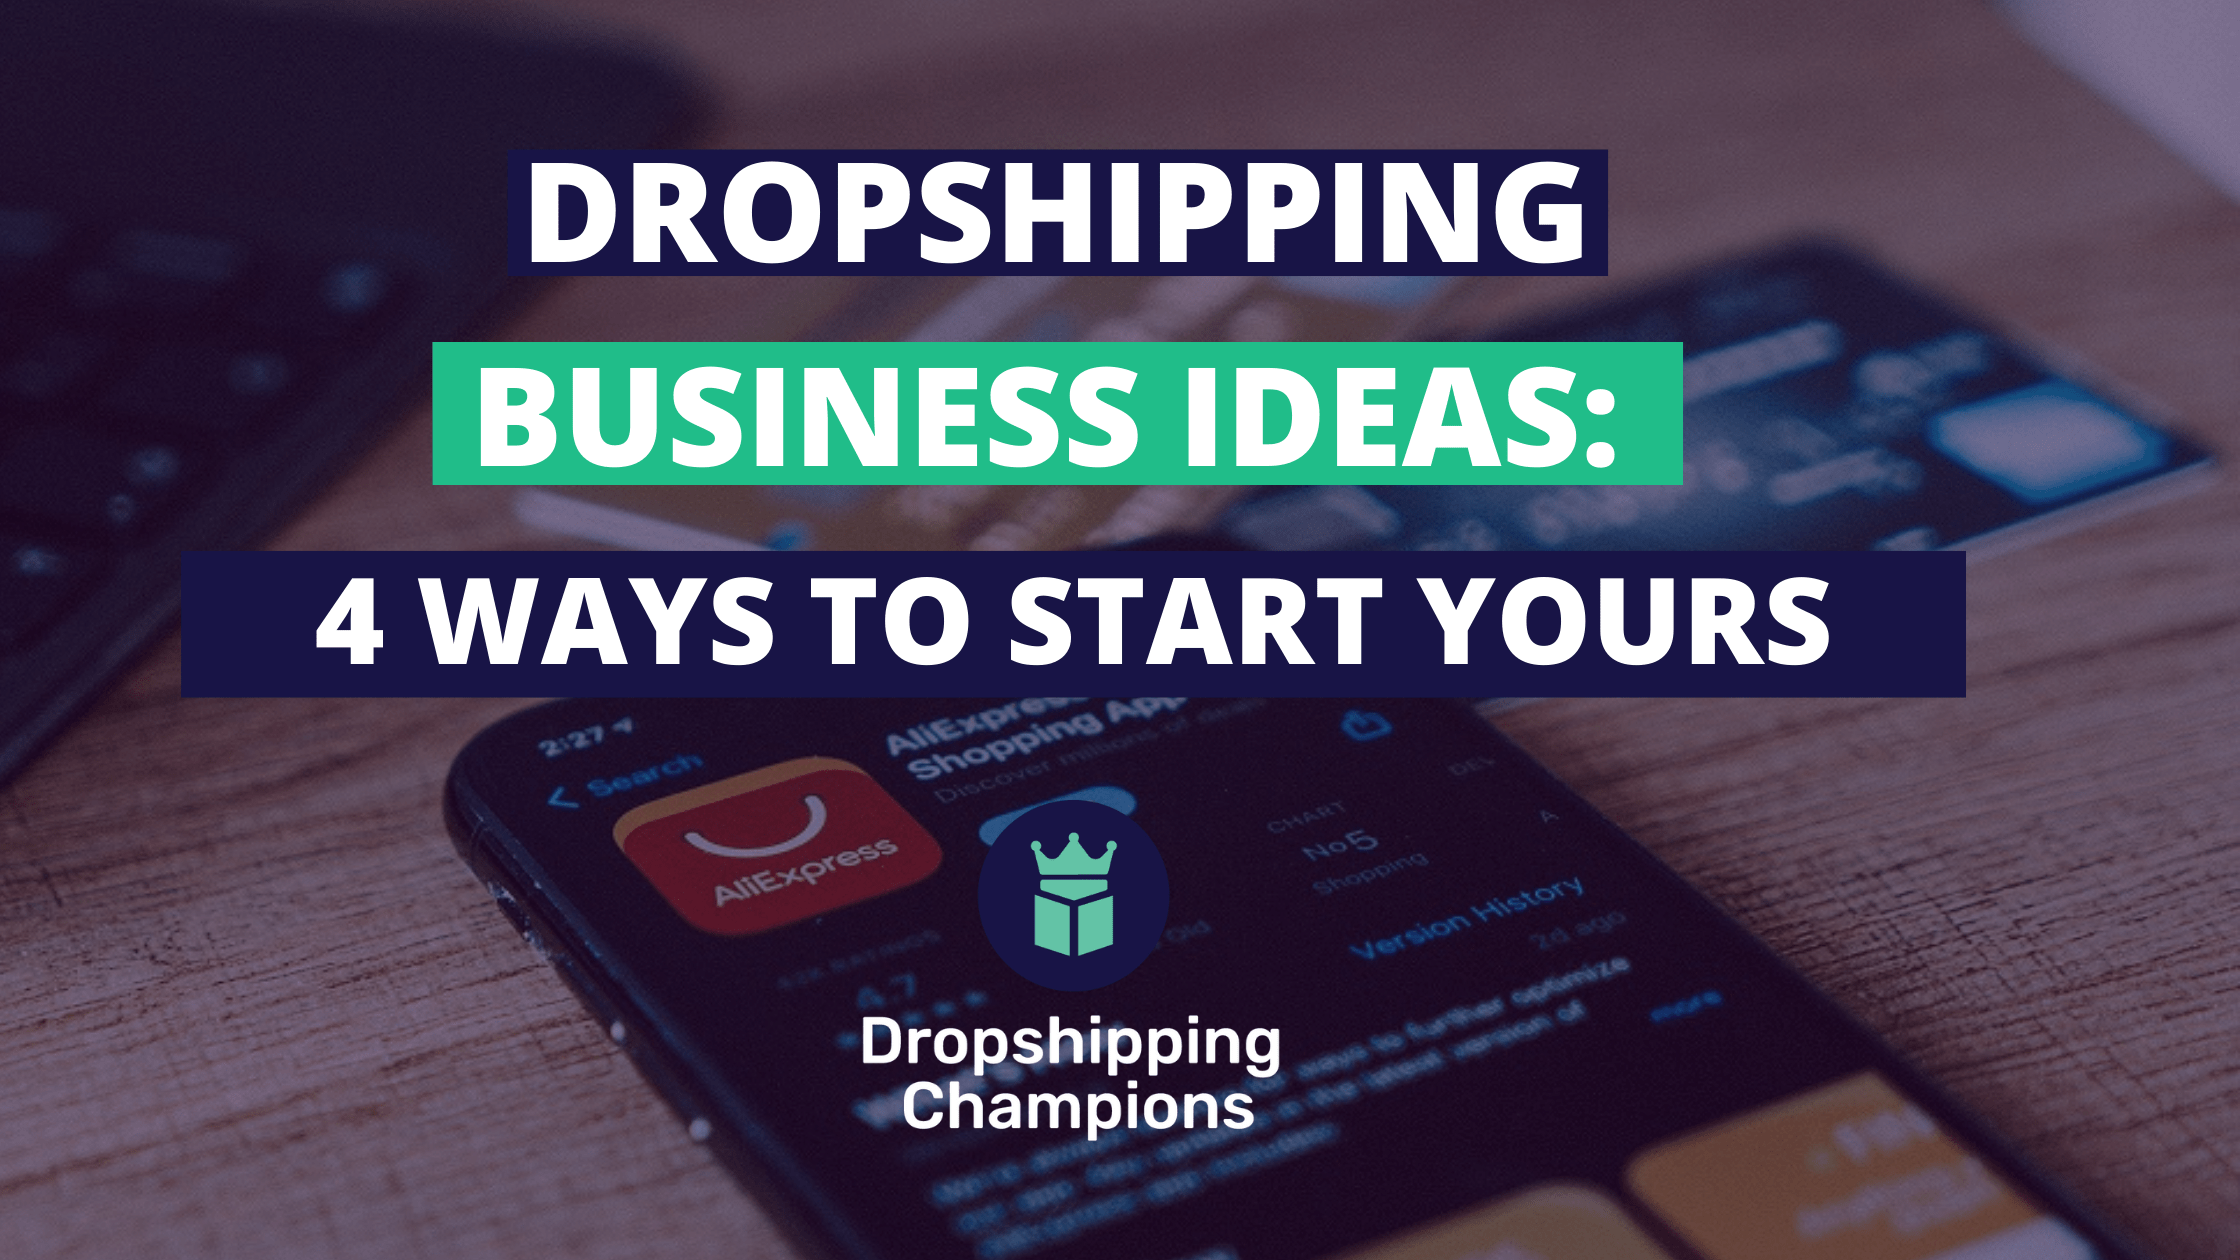 Dropshipping Business Ideas: 4 Ways on How to Start Your First Dropship Business.